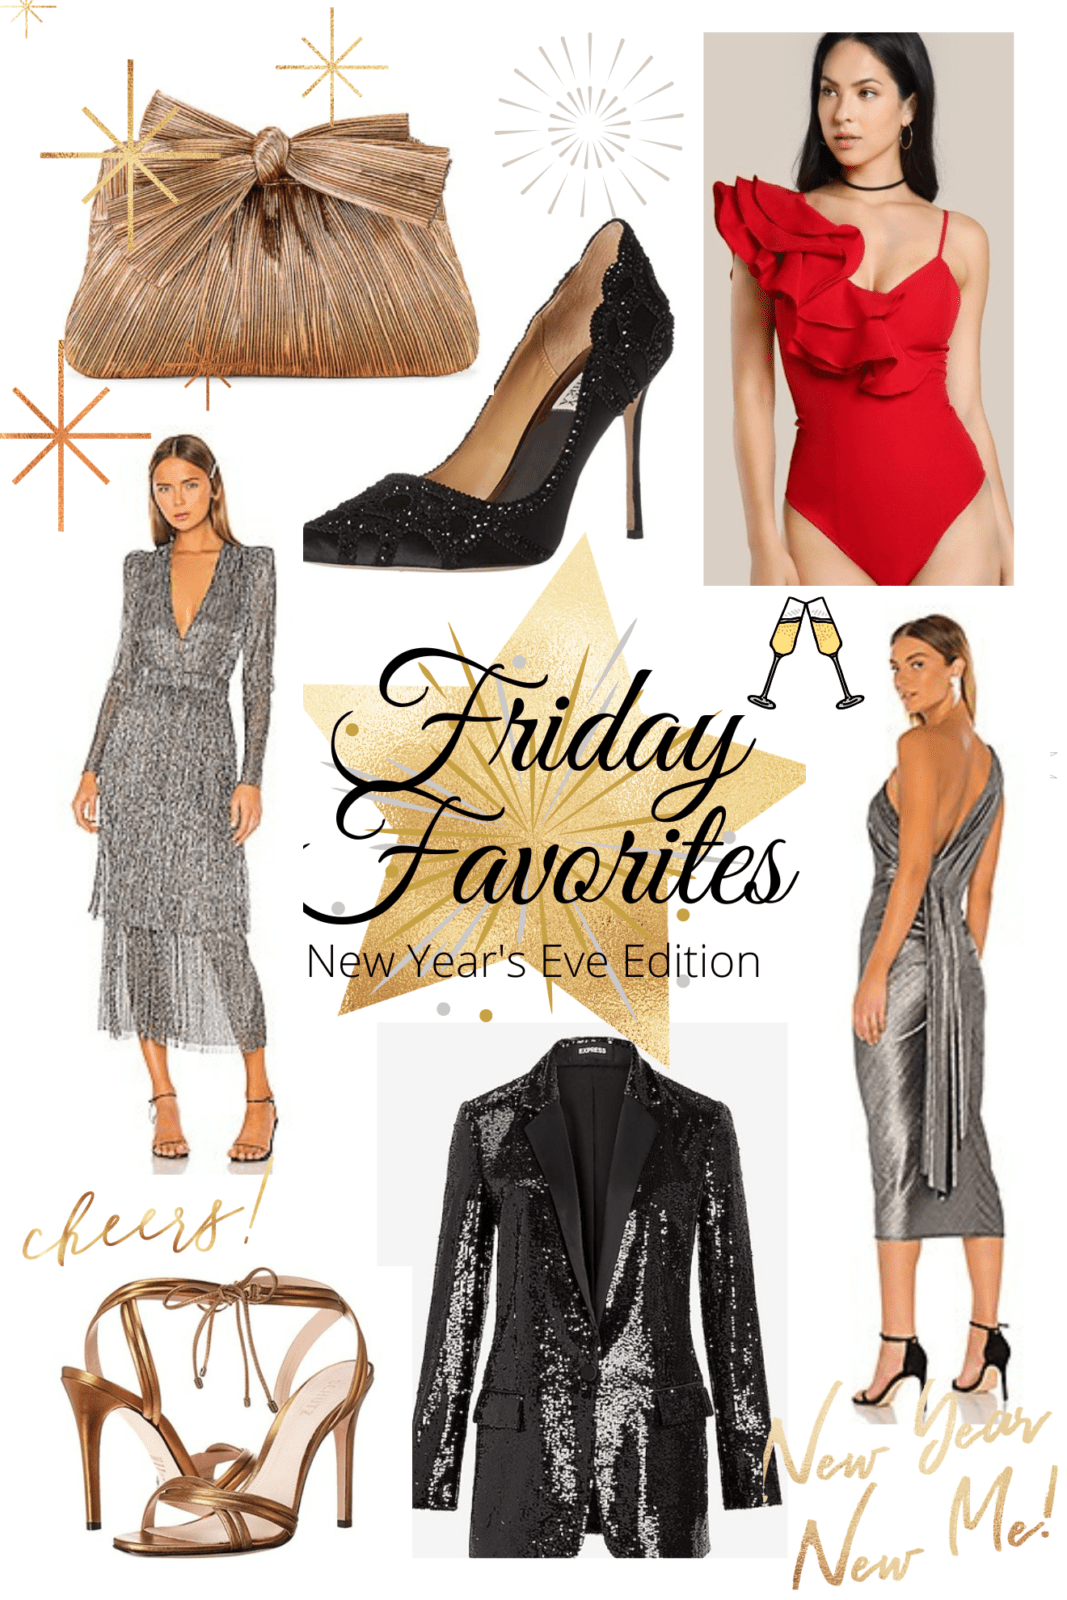 Friday Favorites New Year's Edition, New Year's Eve Outfit Ideas, New Year's Eve Outfits, New Year's Eve Dresses, Holiday Dresses